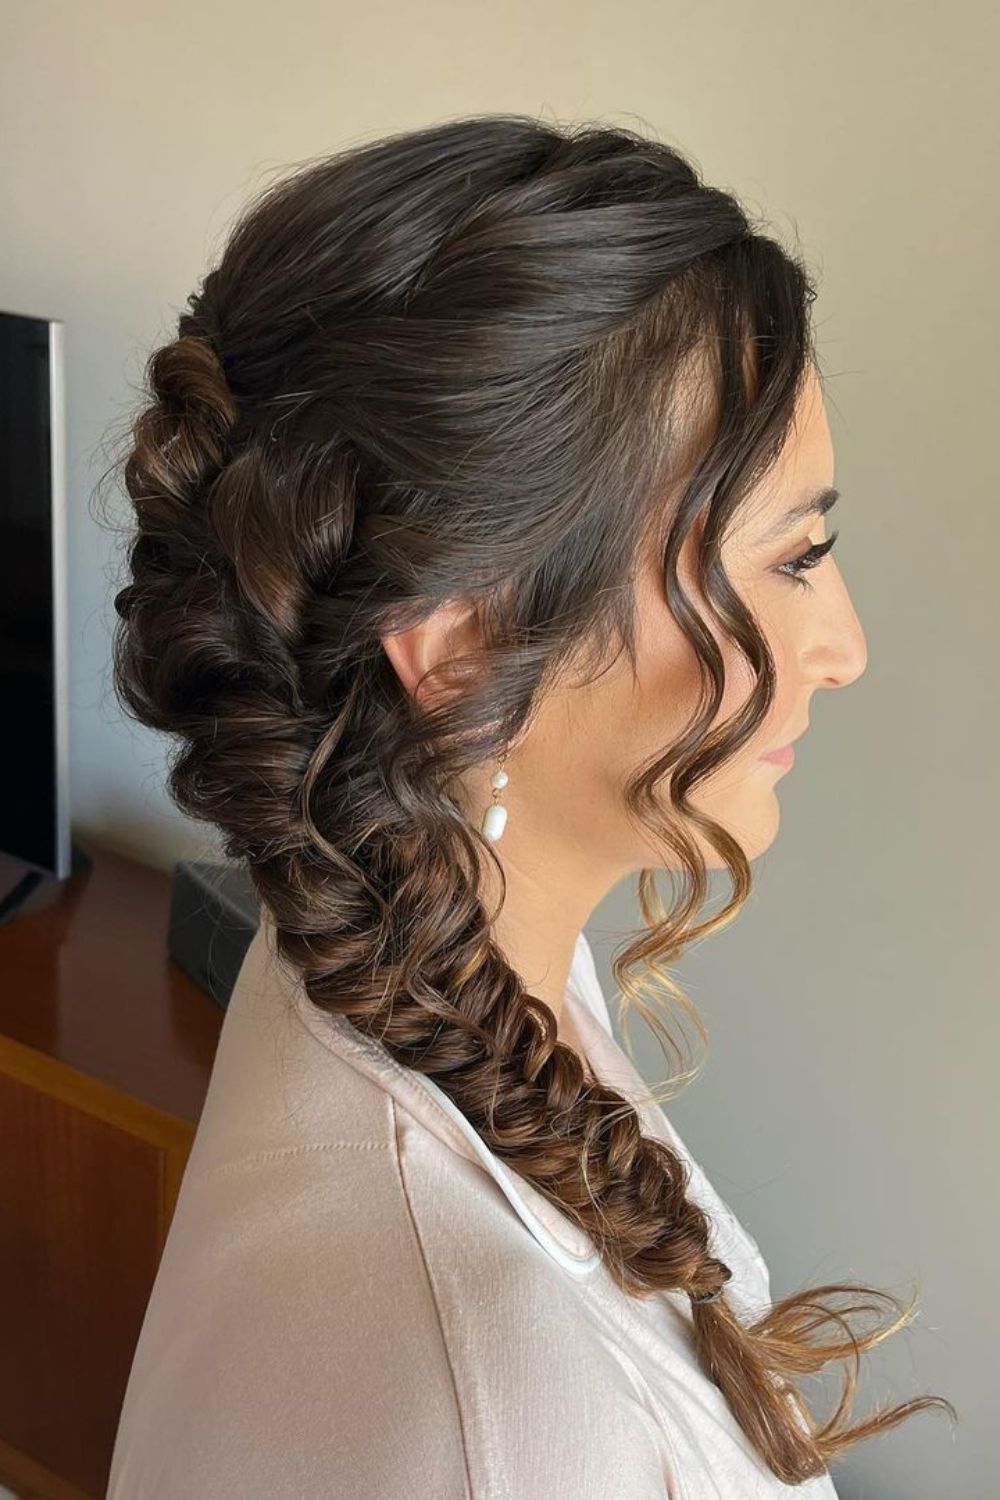 A woman with a side braid.